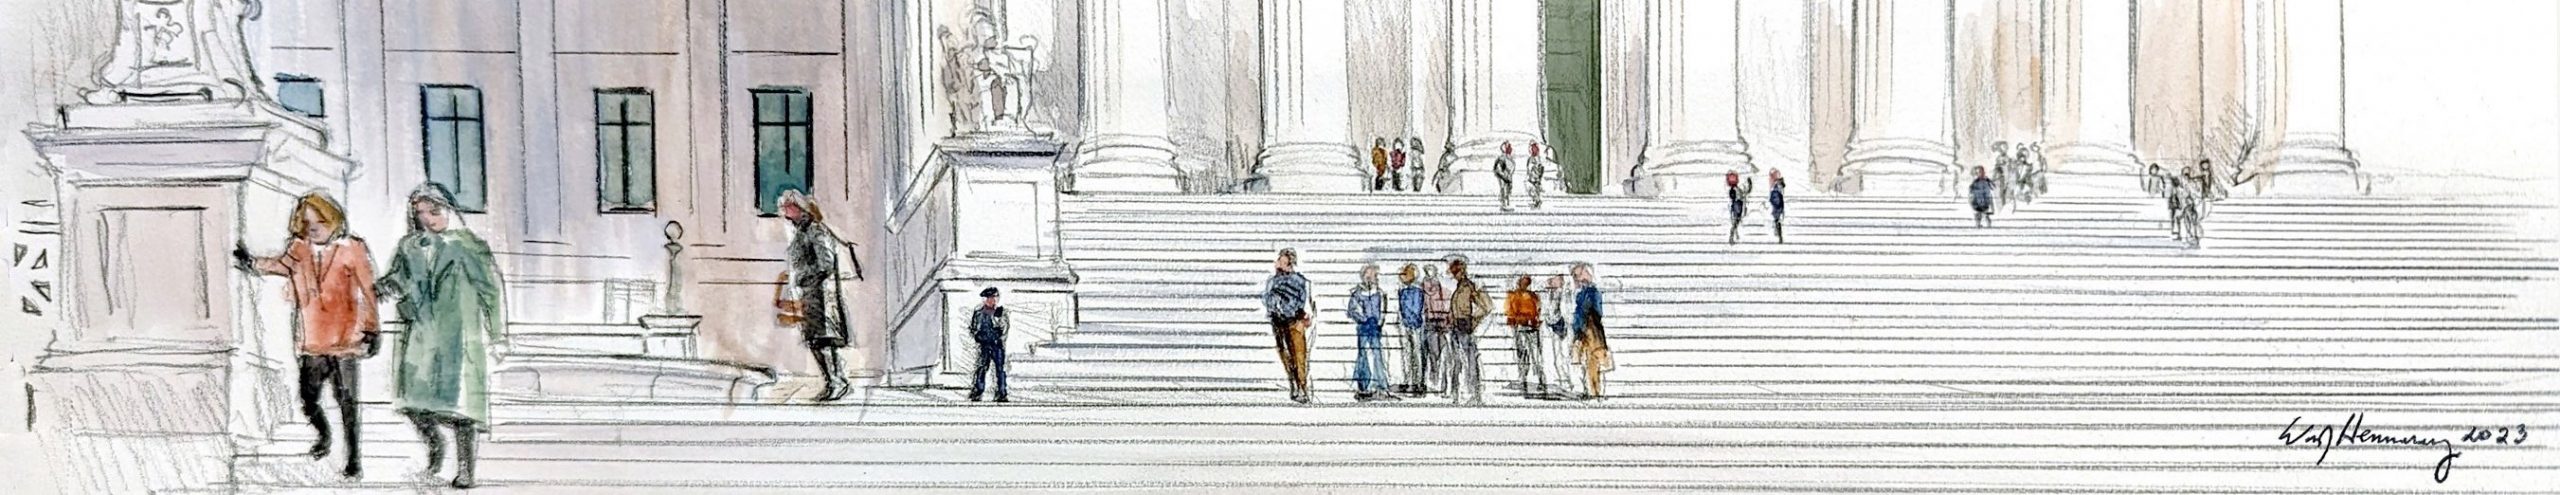 artist's sketch of people in winter coats gathering in small groups on the front steps of the supreme court